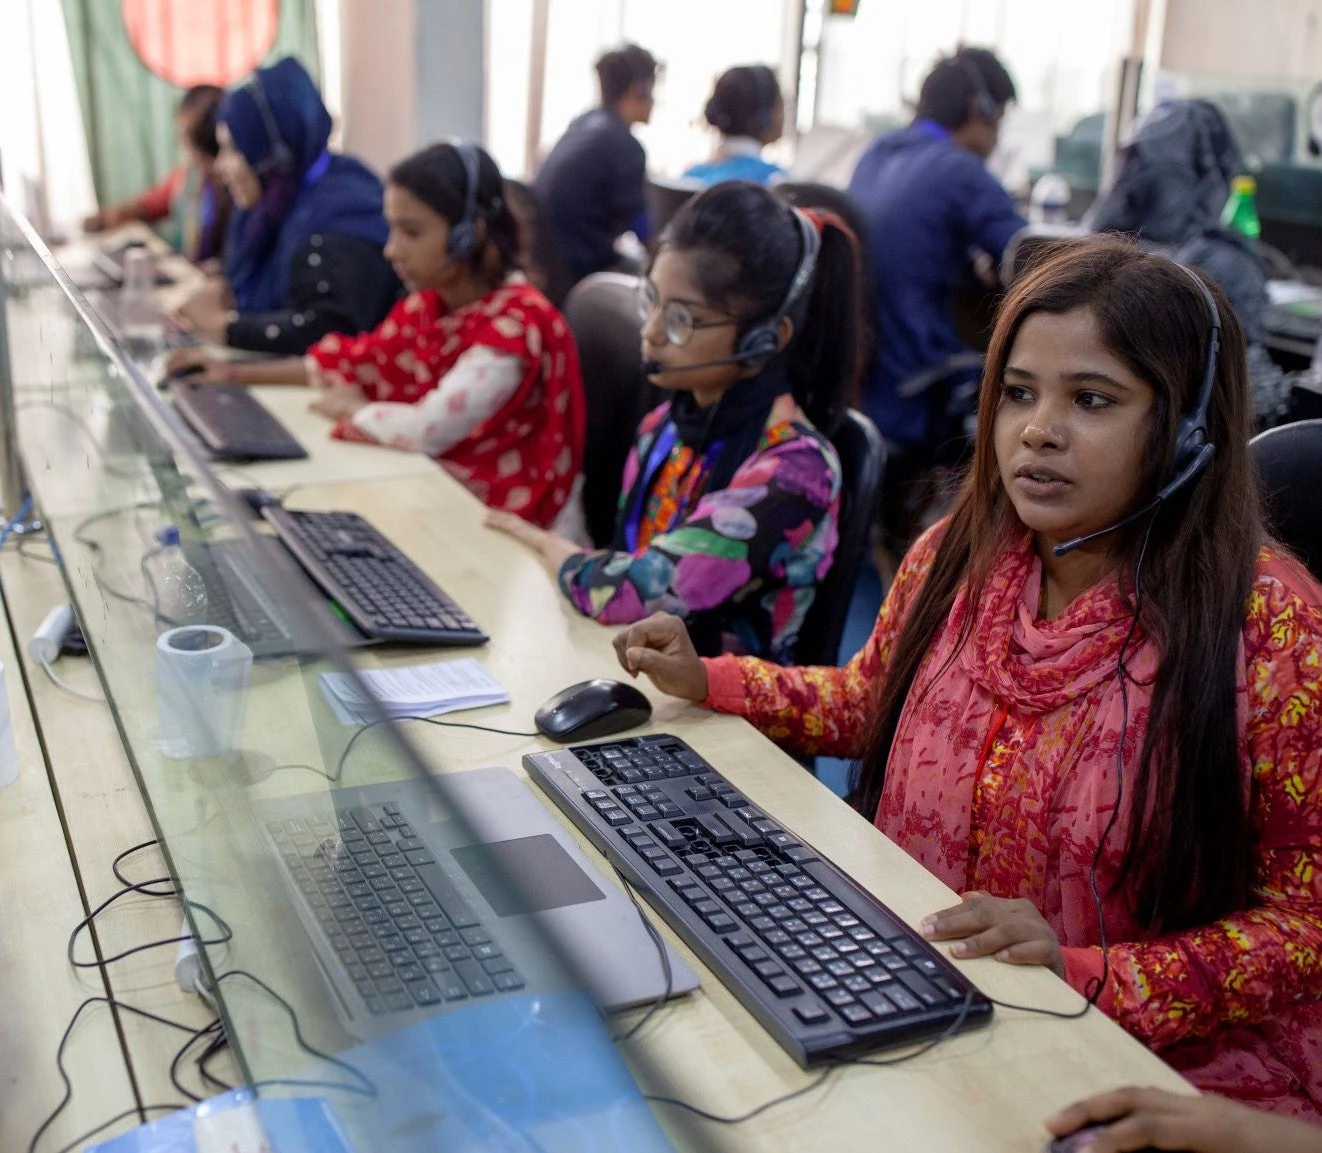 Every year 2 million youth enter the labor force in Bangladesh. For export growth and competitiveness, more investments are needed in education and skills training.